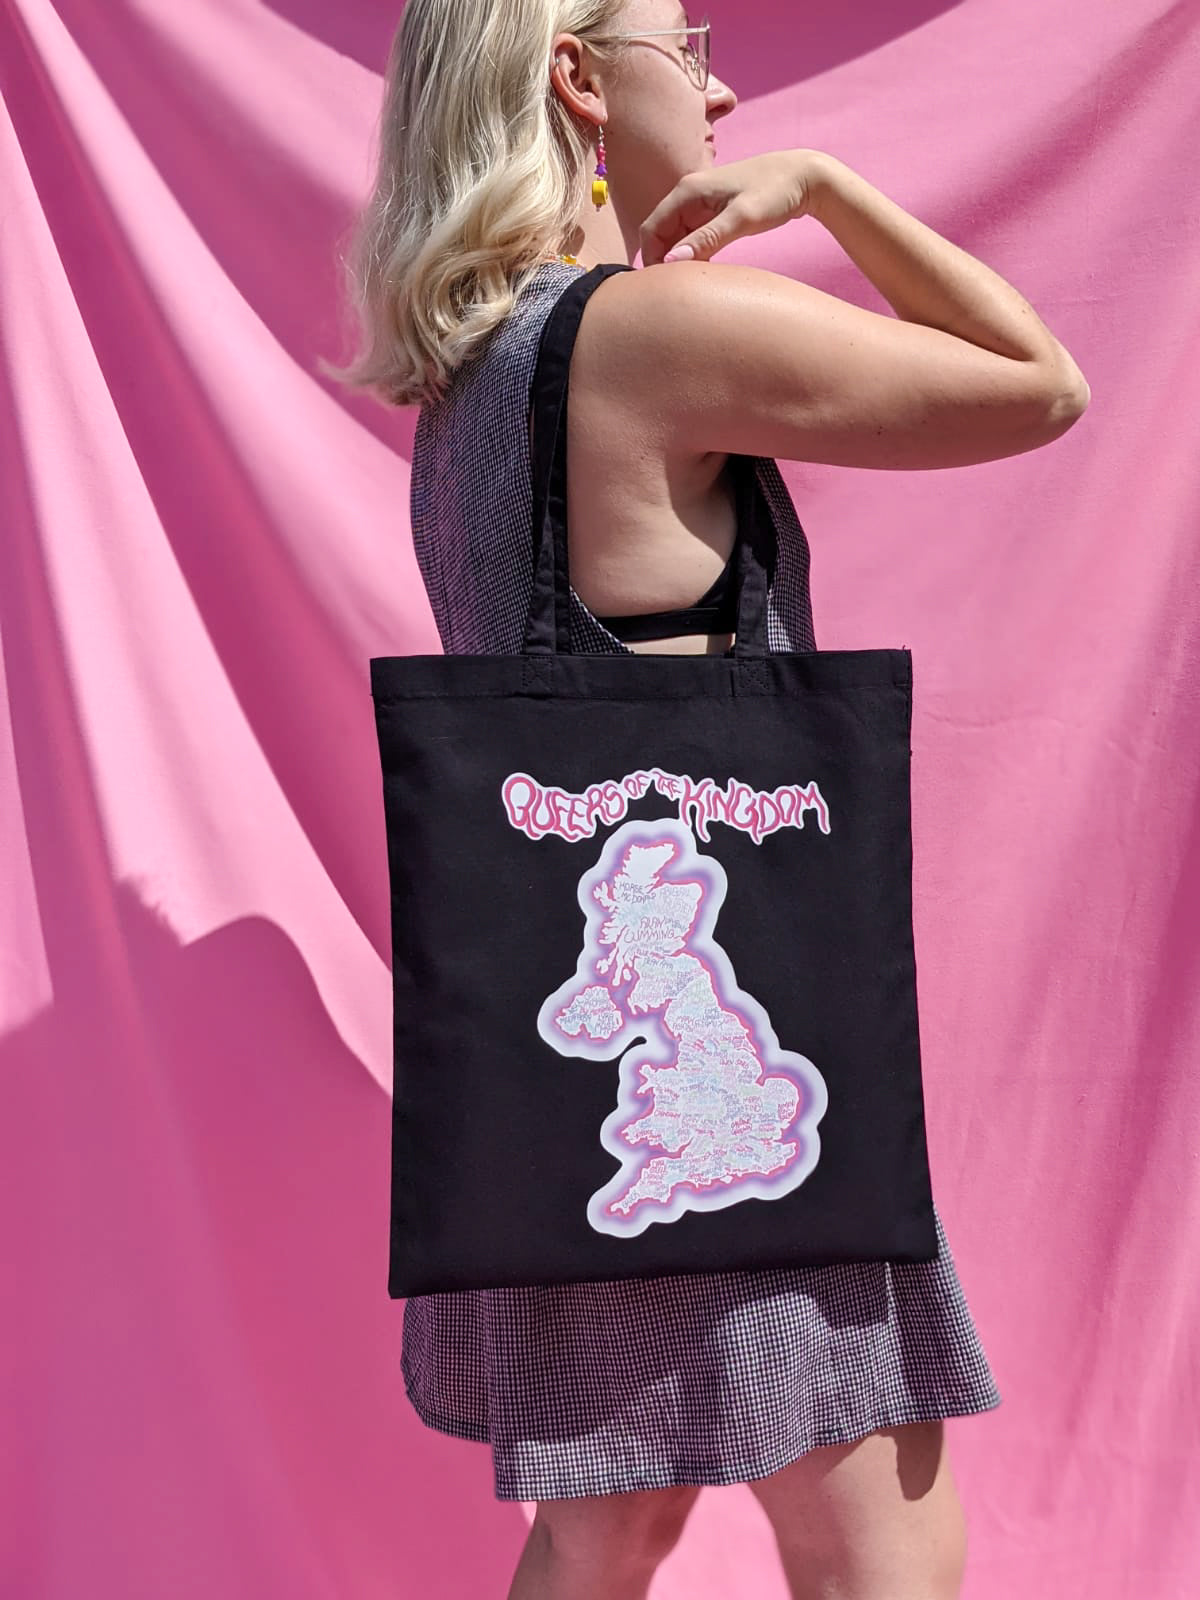 queers of the kingdom tote bag